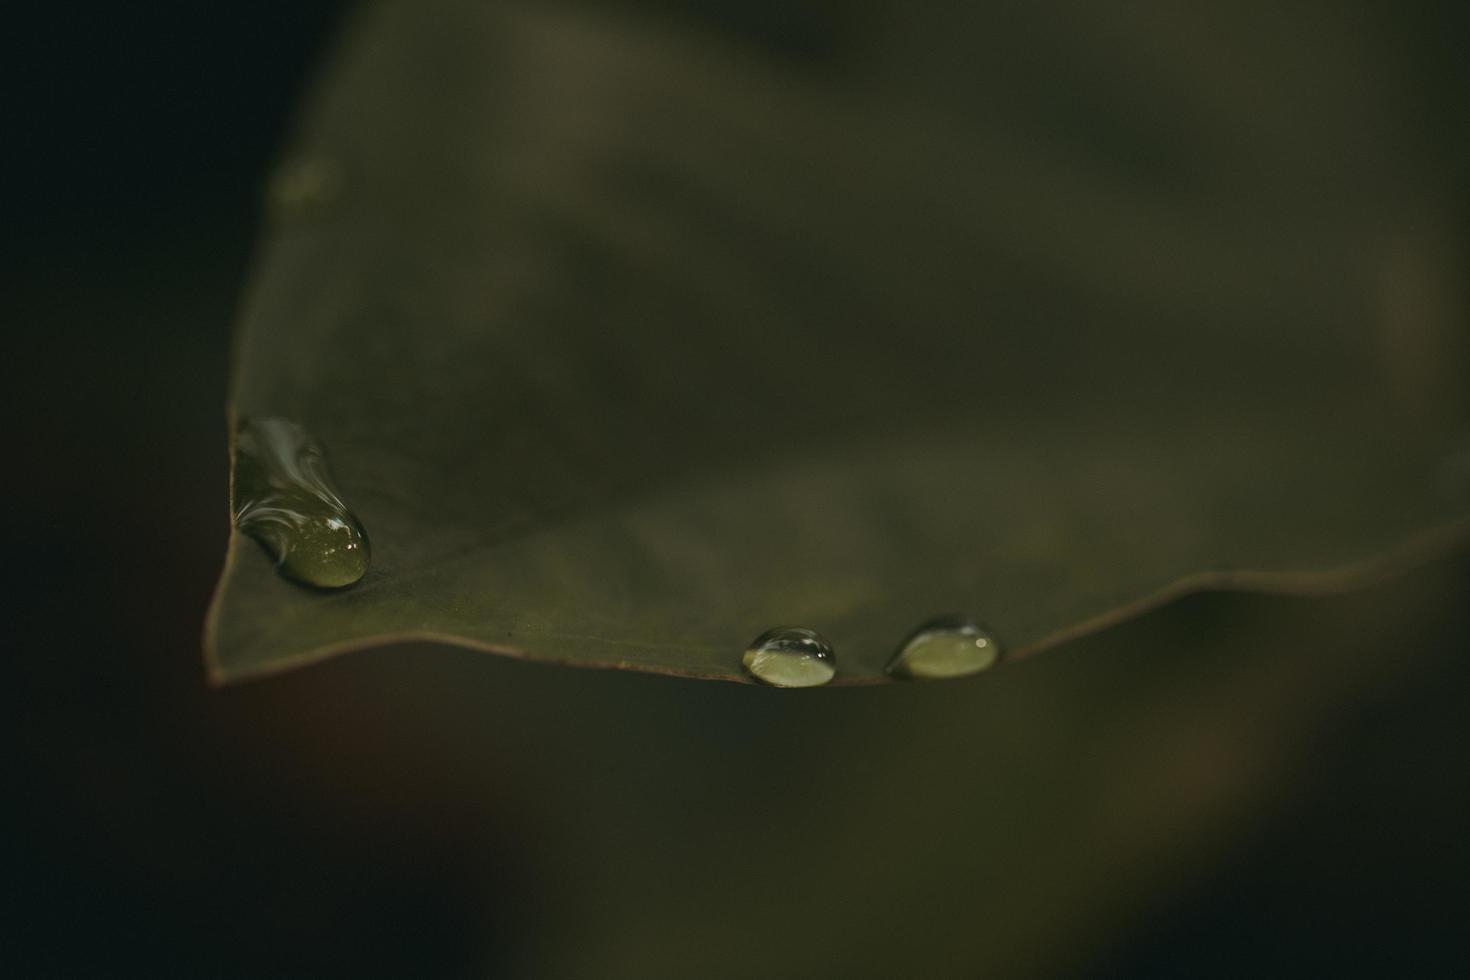 Water droplets on green leaf photo